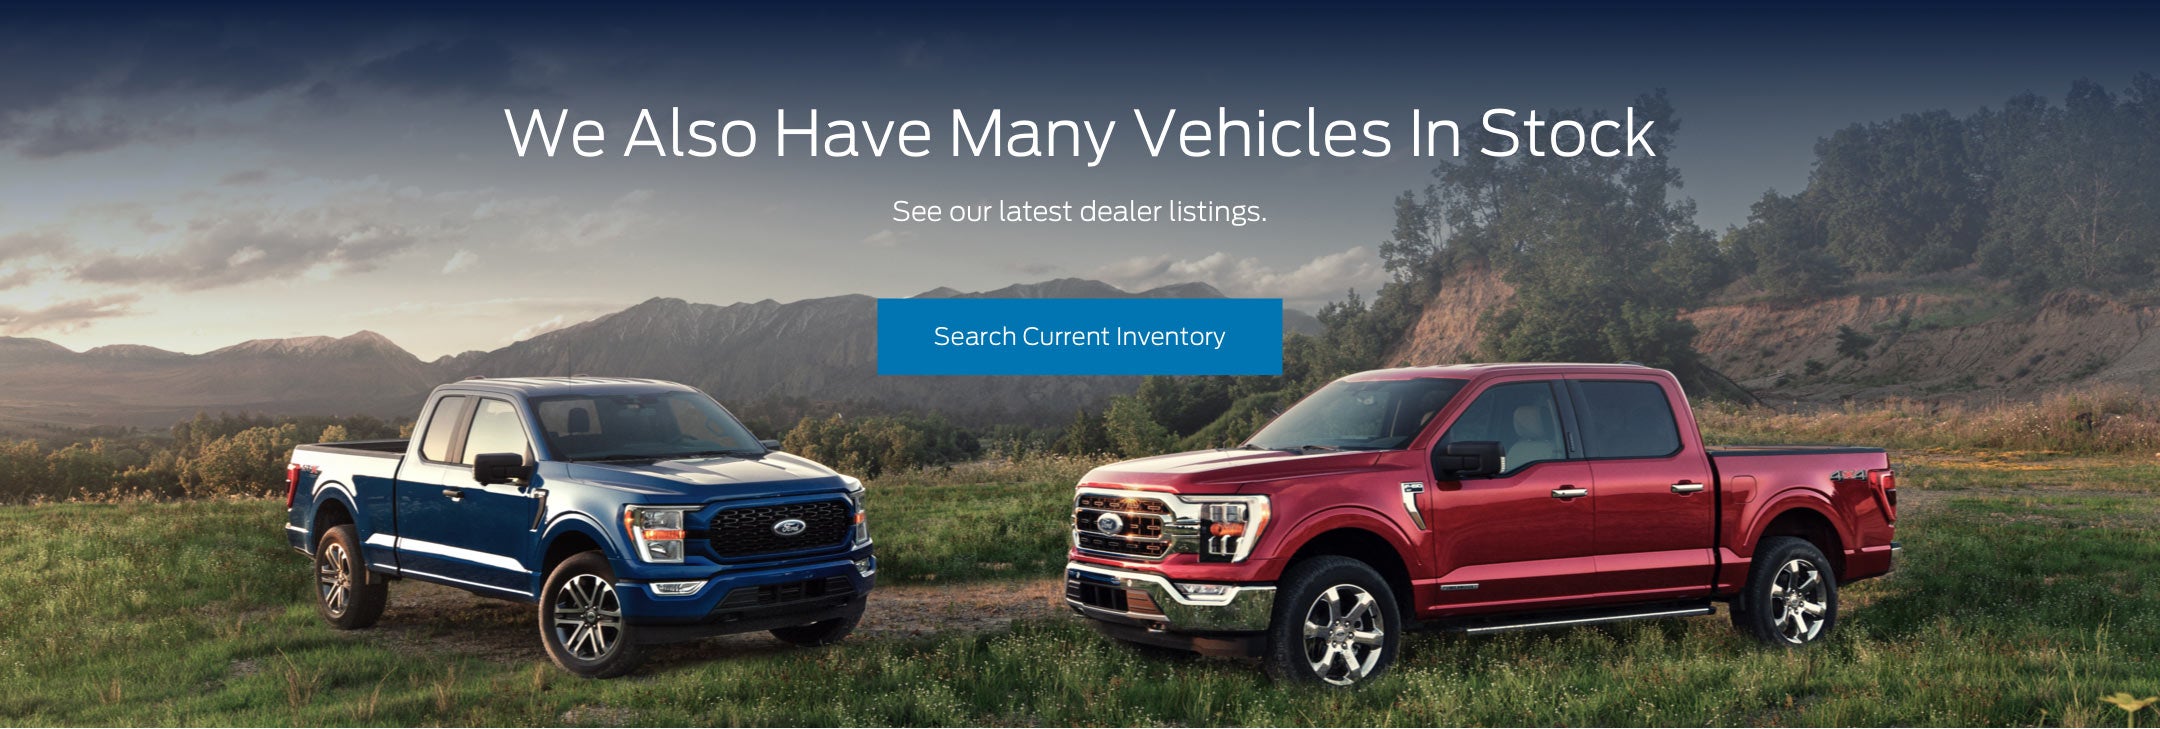 Ford vehicles in stock | Stanley Ford Sweetwater in Sweetwater TX